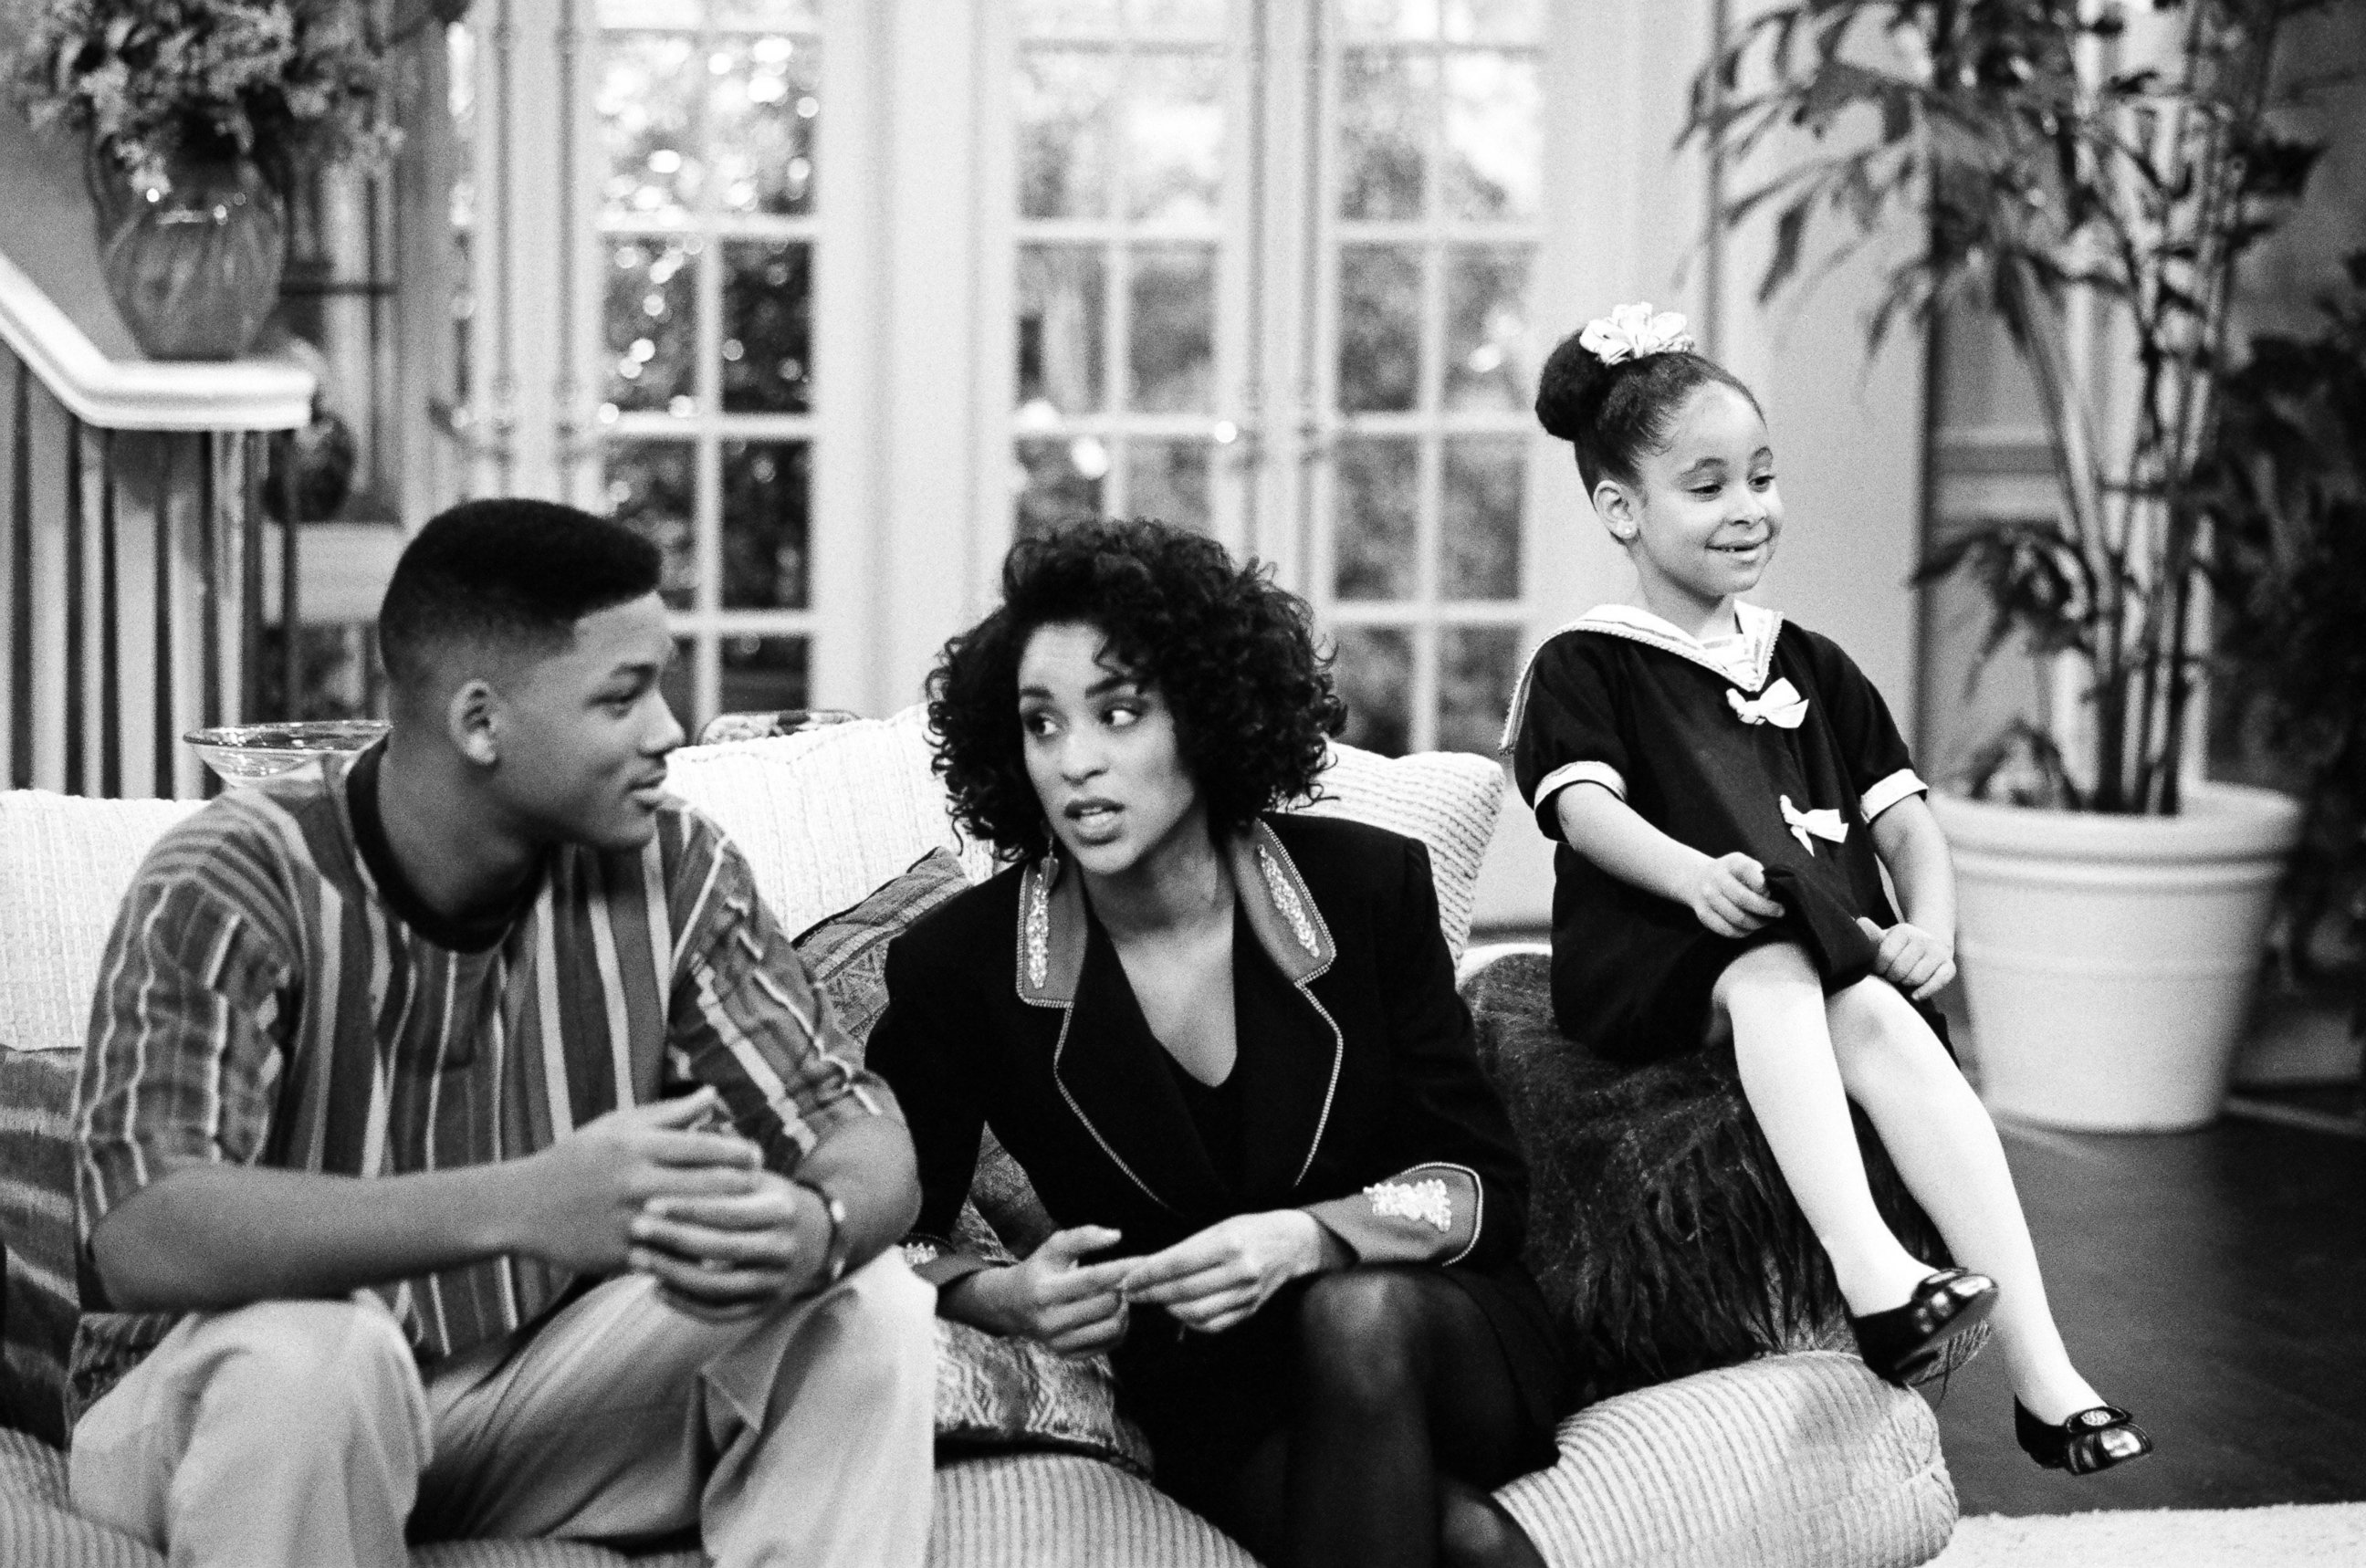 PHOTO: From the left, Will Smith as William 'Will' Smith, Karyn Parsons as Hilary Banks, Raven-Symone as Claudia  in "The Fresh Prince of Bel-Air."